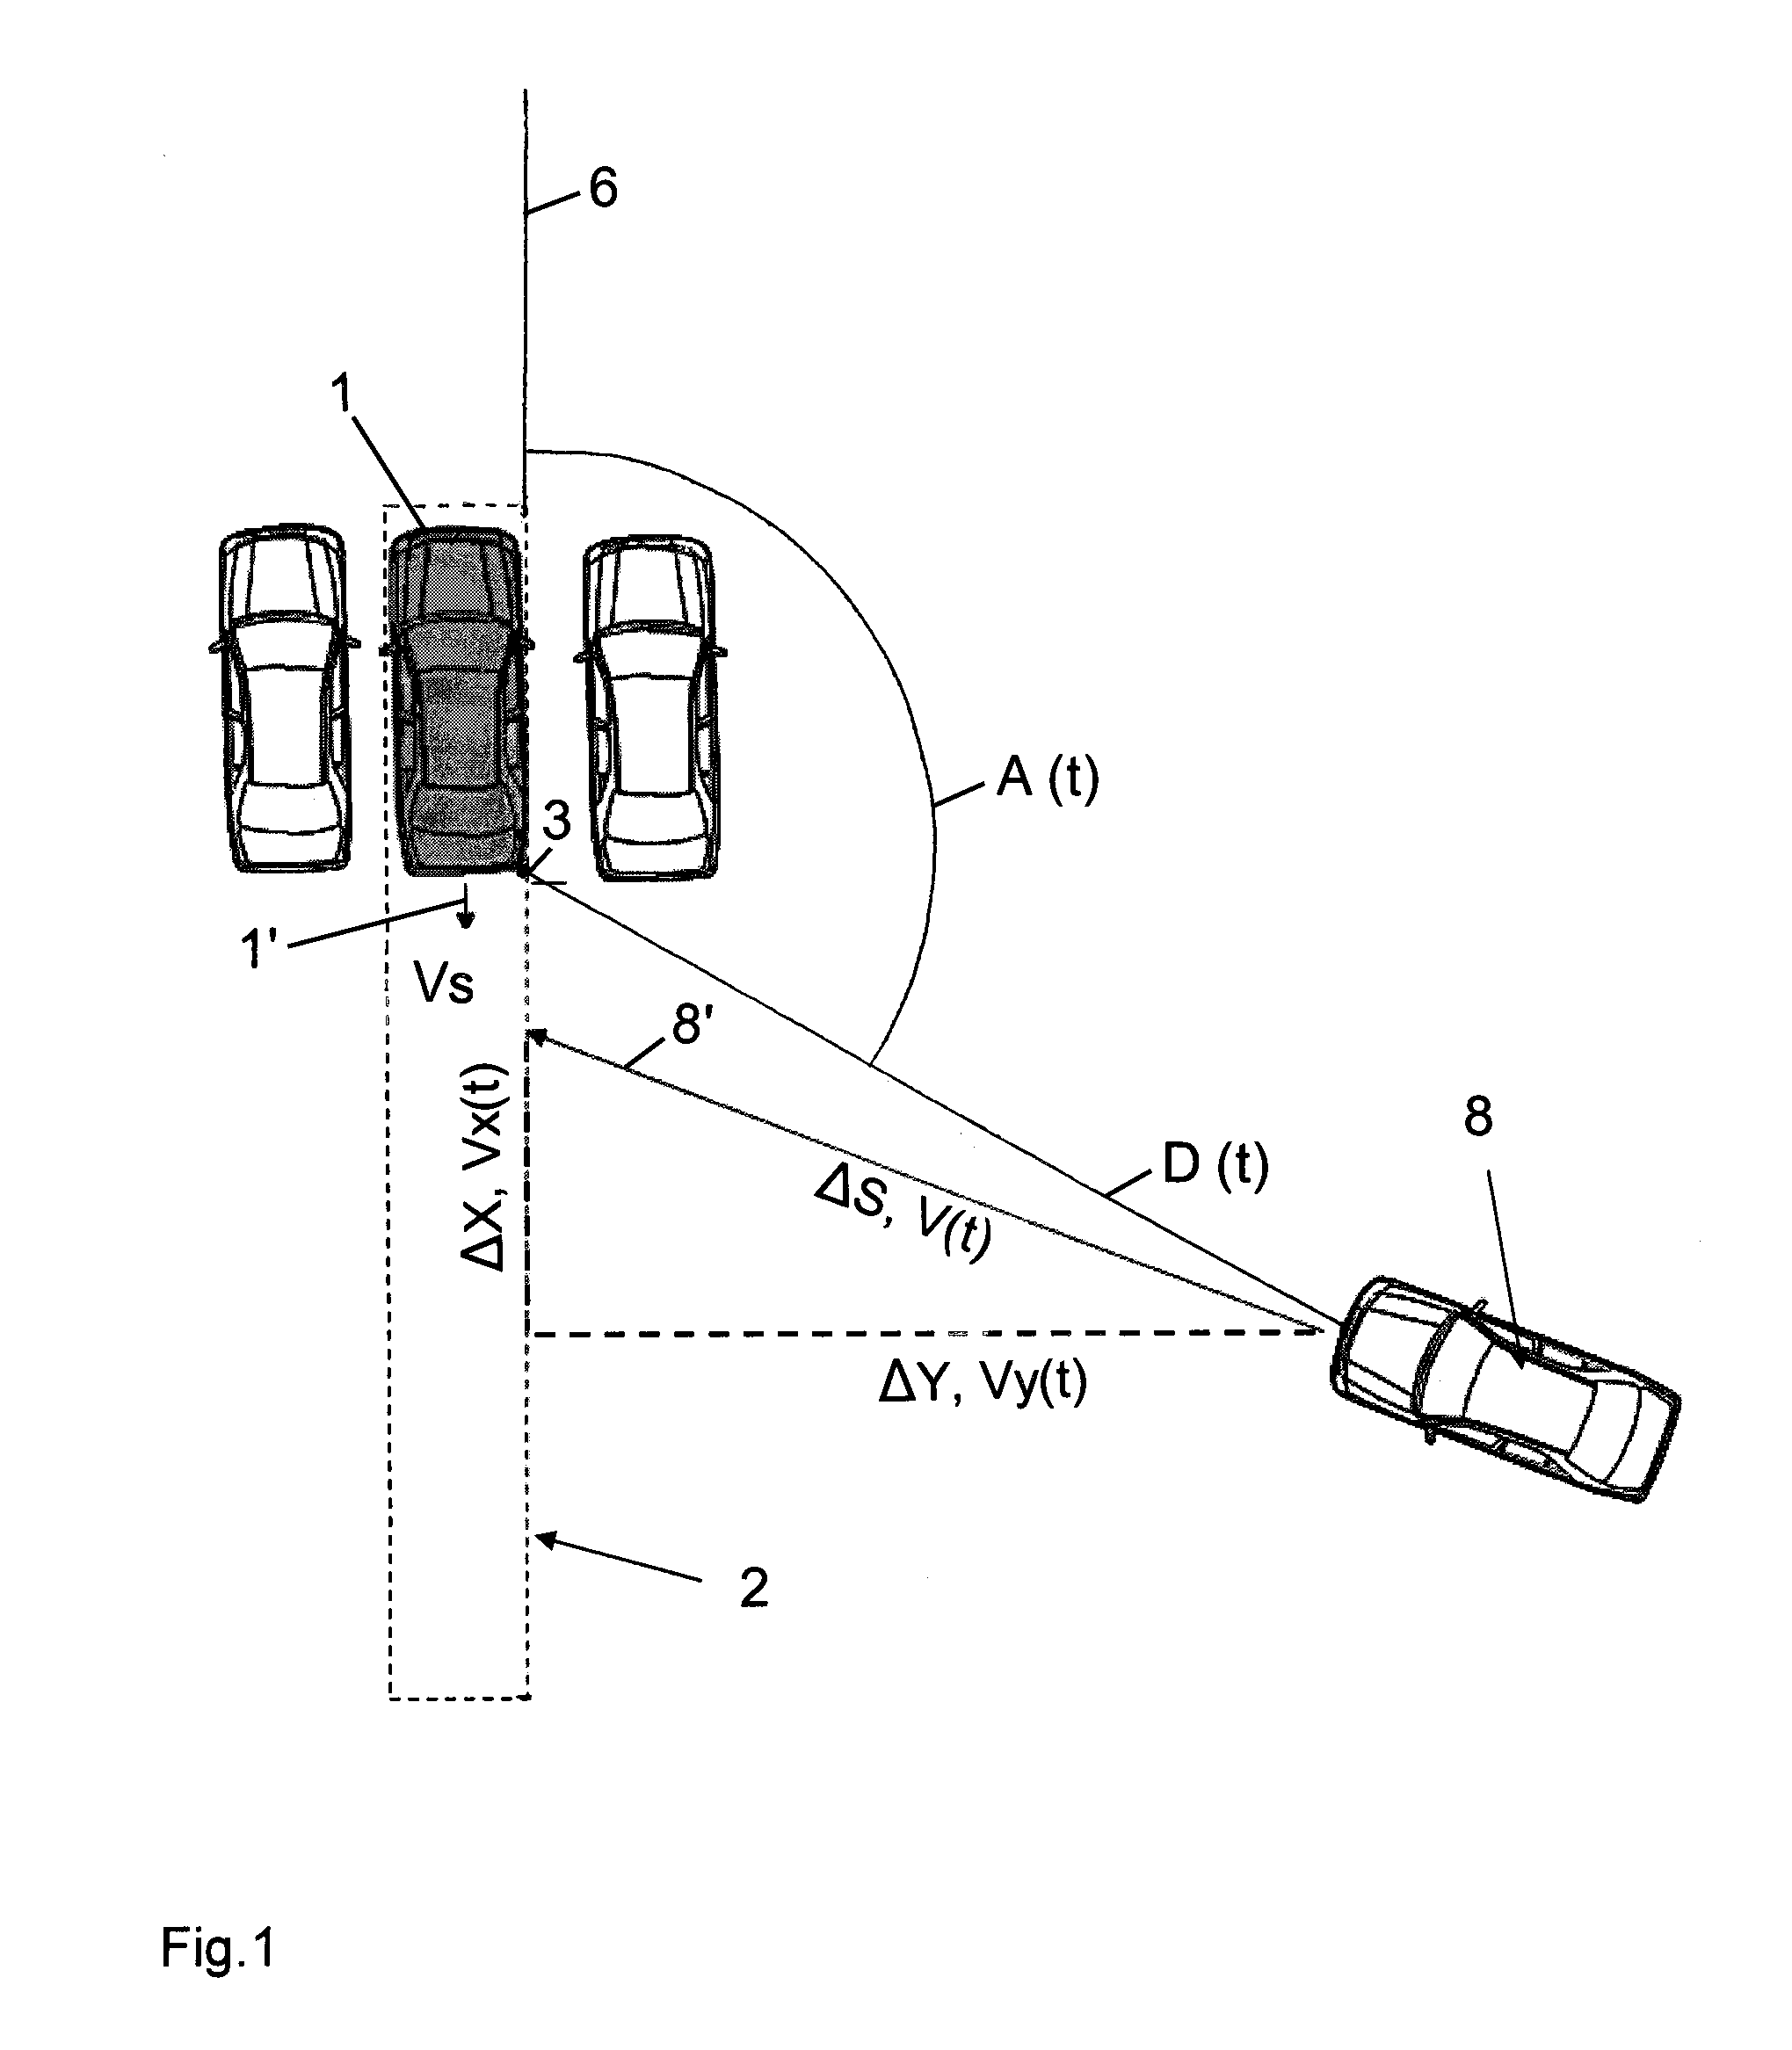 Method and System for Warning a Driver of a Vehicle About Potential Obstacles Behind the Vehicle